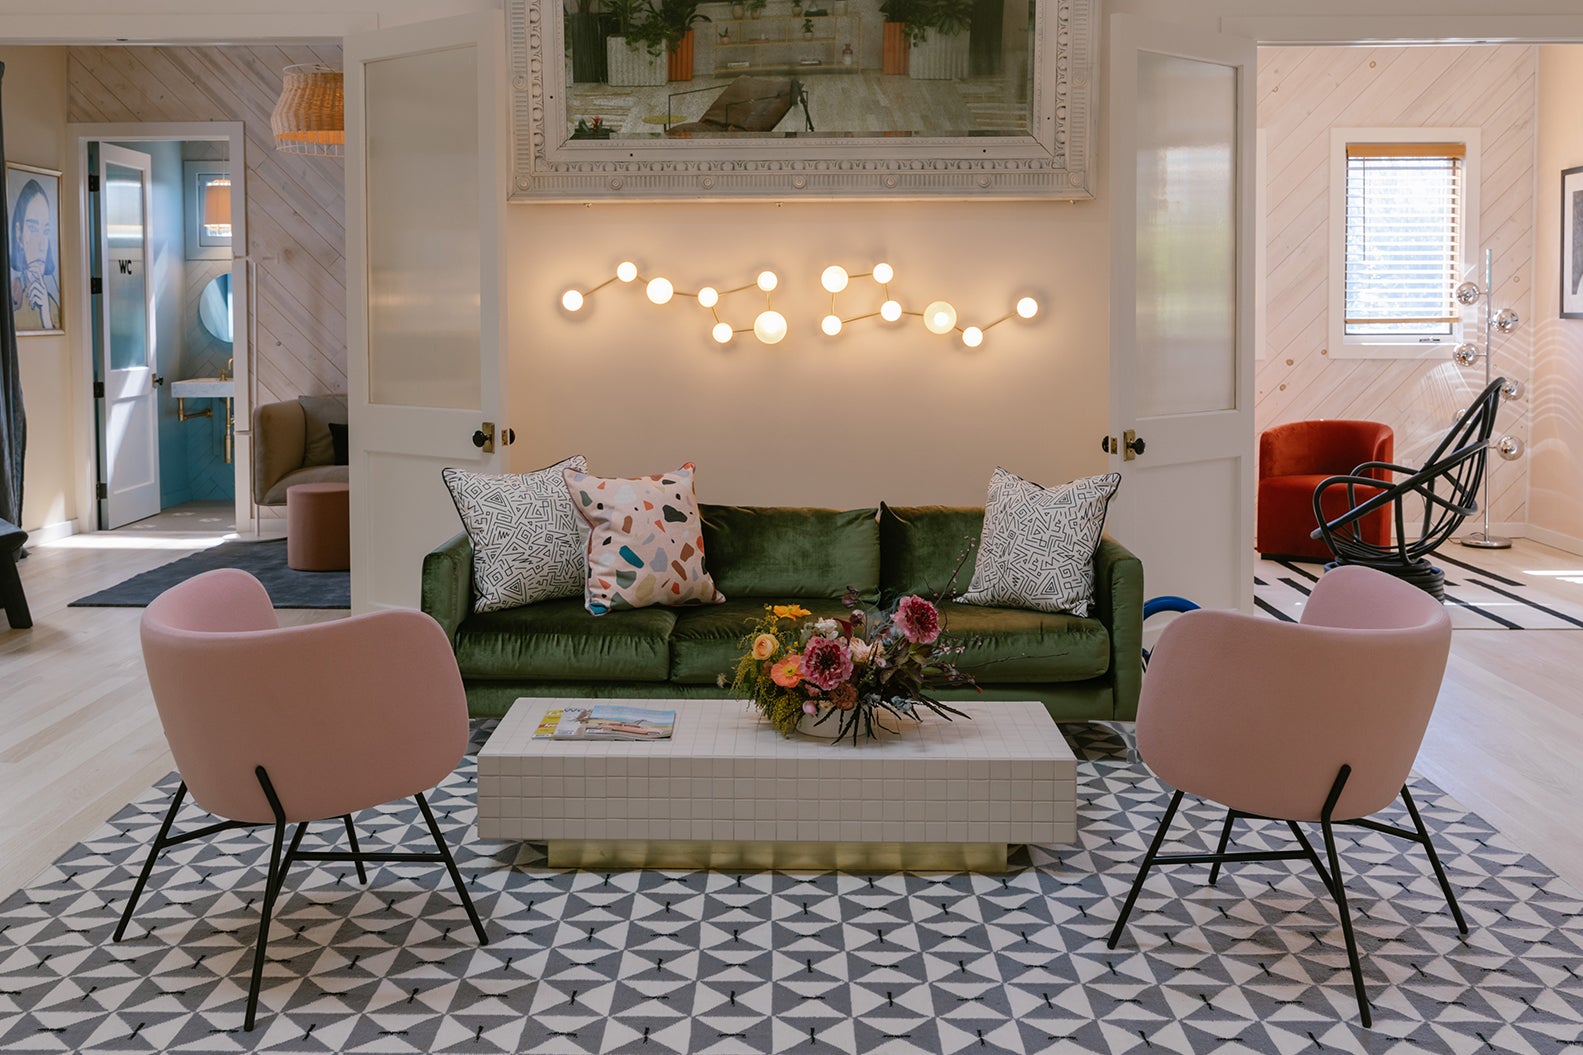 Space with green sofa and pink chairs